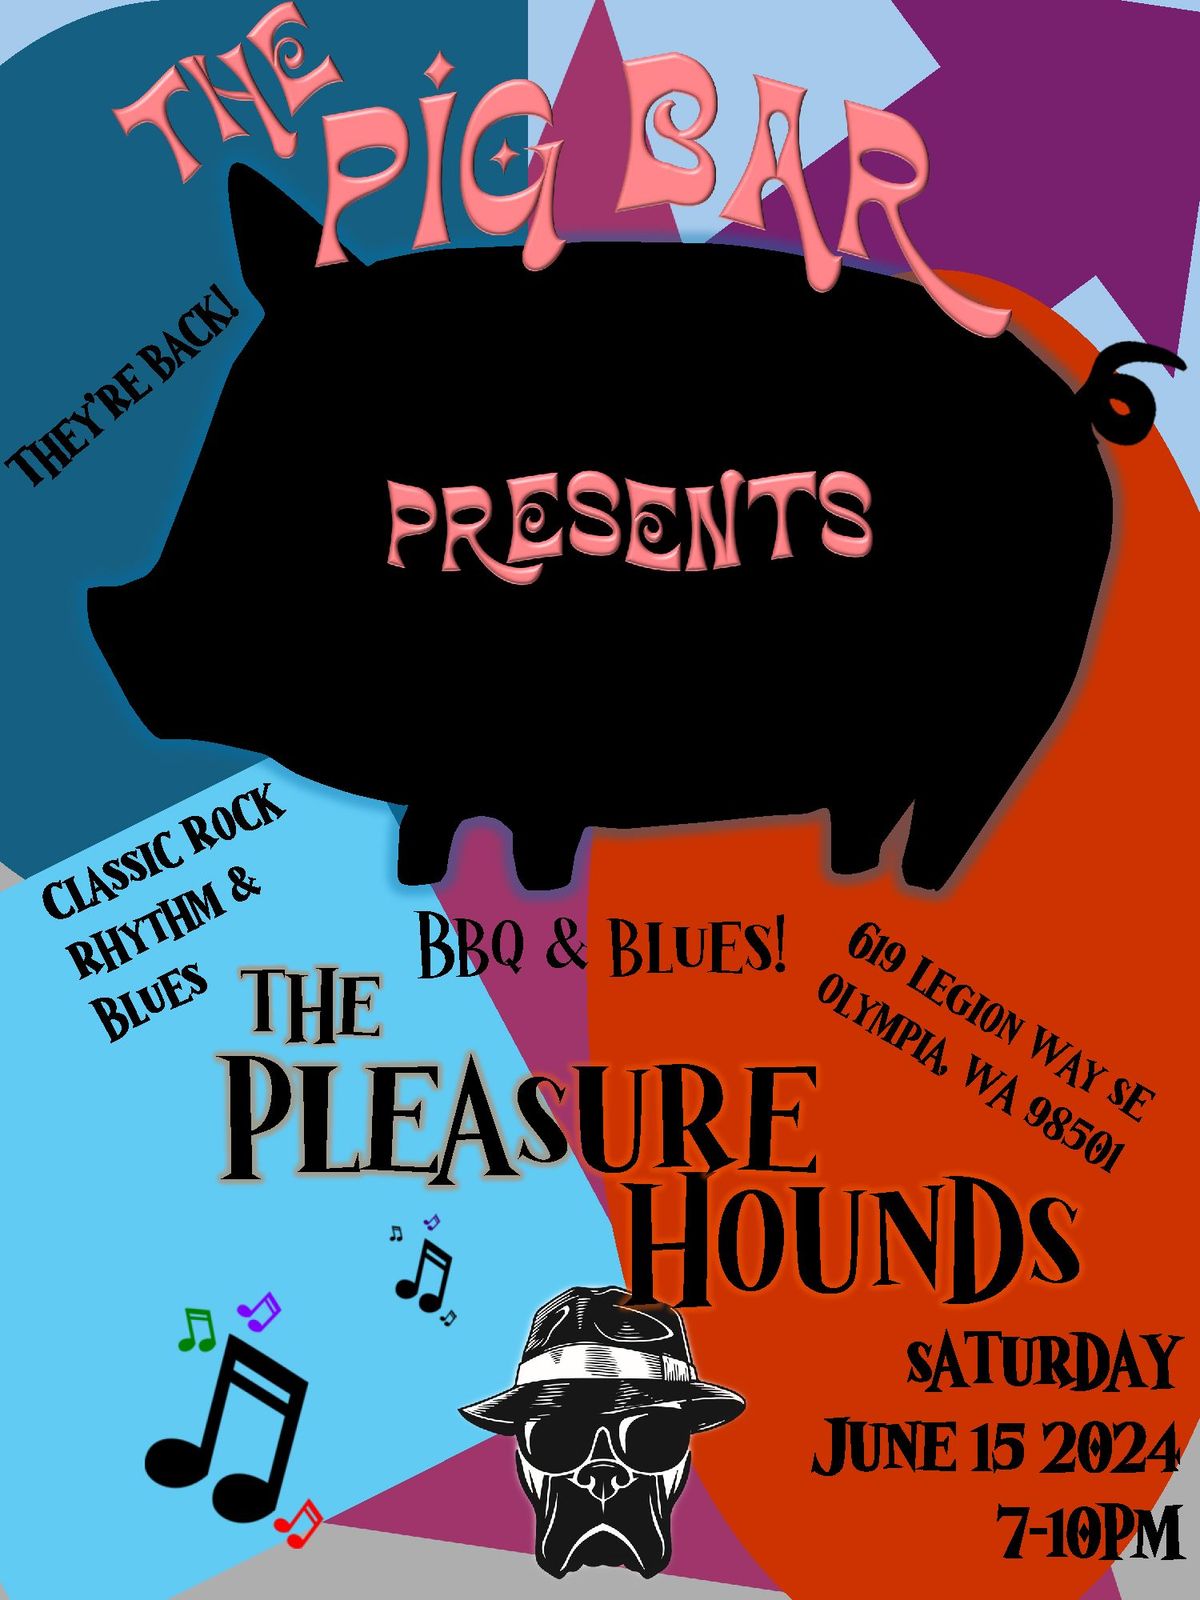 The Hounds Return to The PIG BAR!